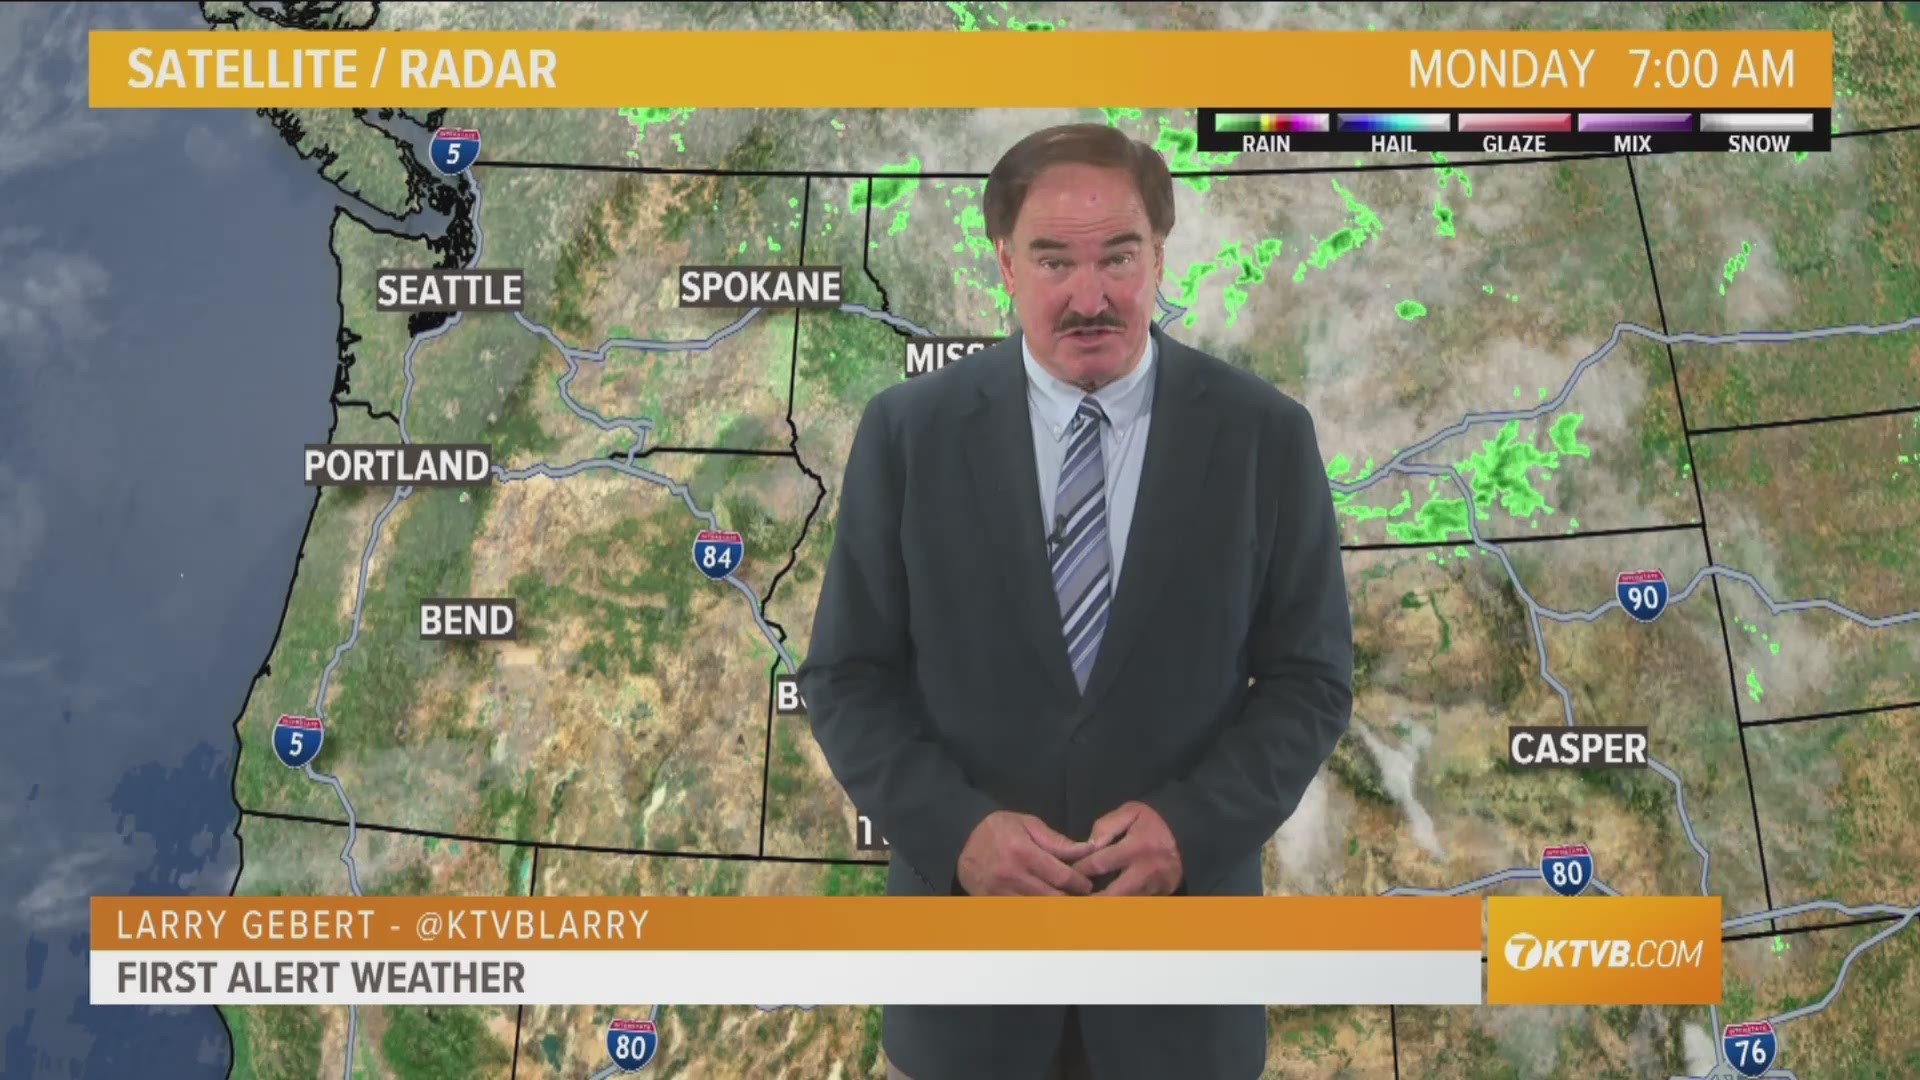 Larry Gebert says to expect mild temperatures for this time of year.